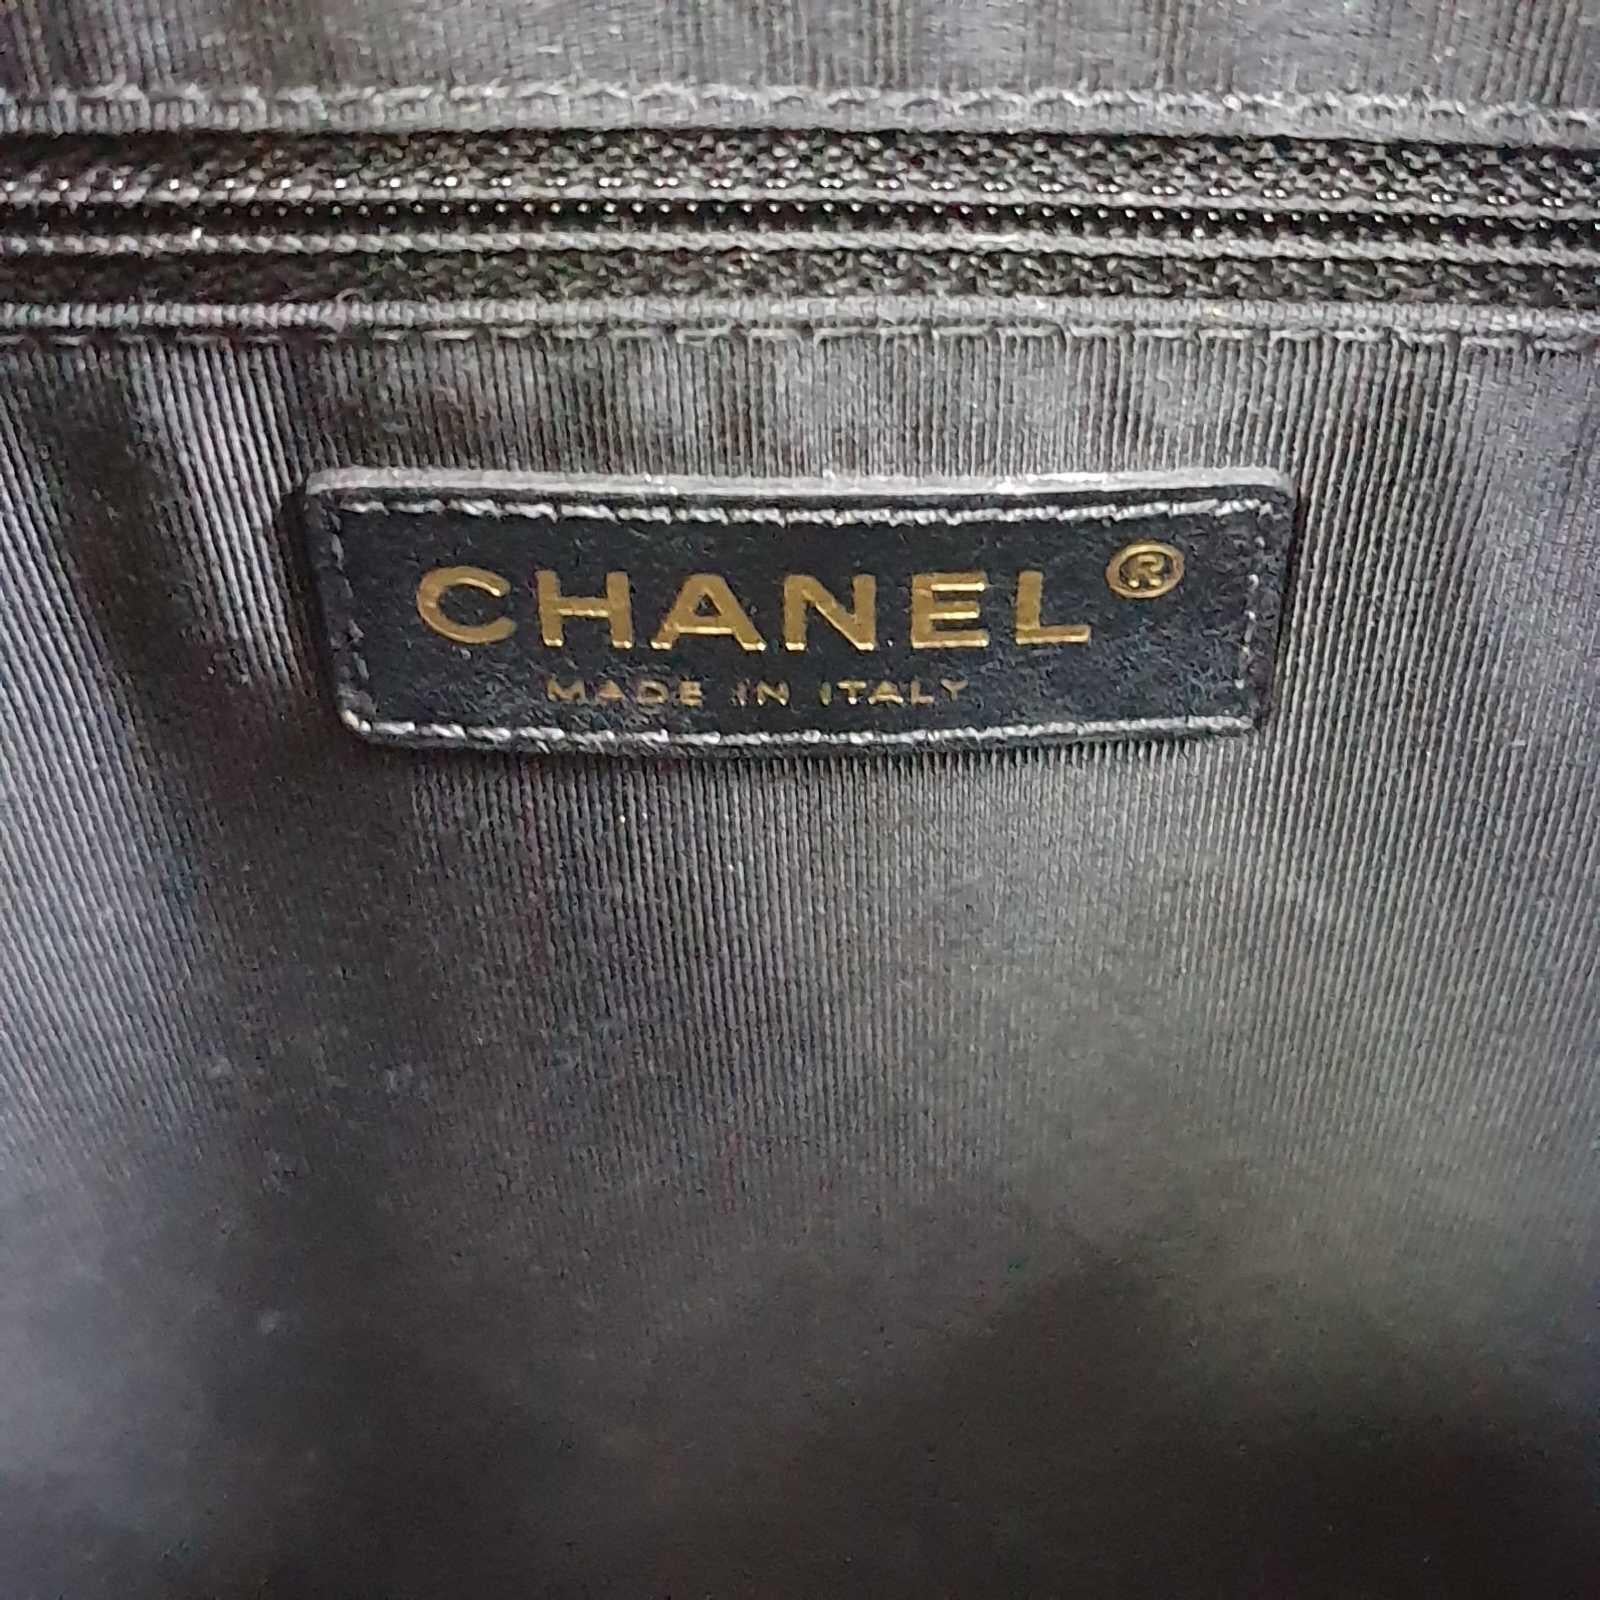 Chanel Boy North to South Black Leather Tote Bag 8